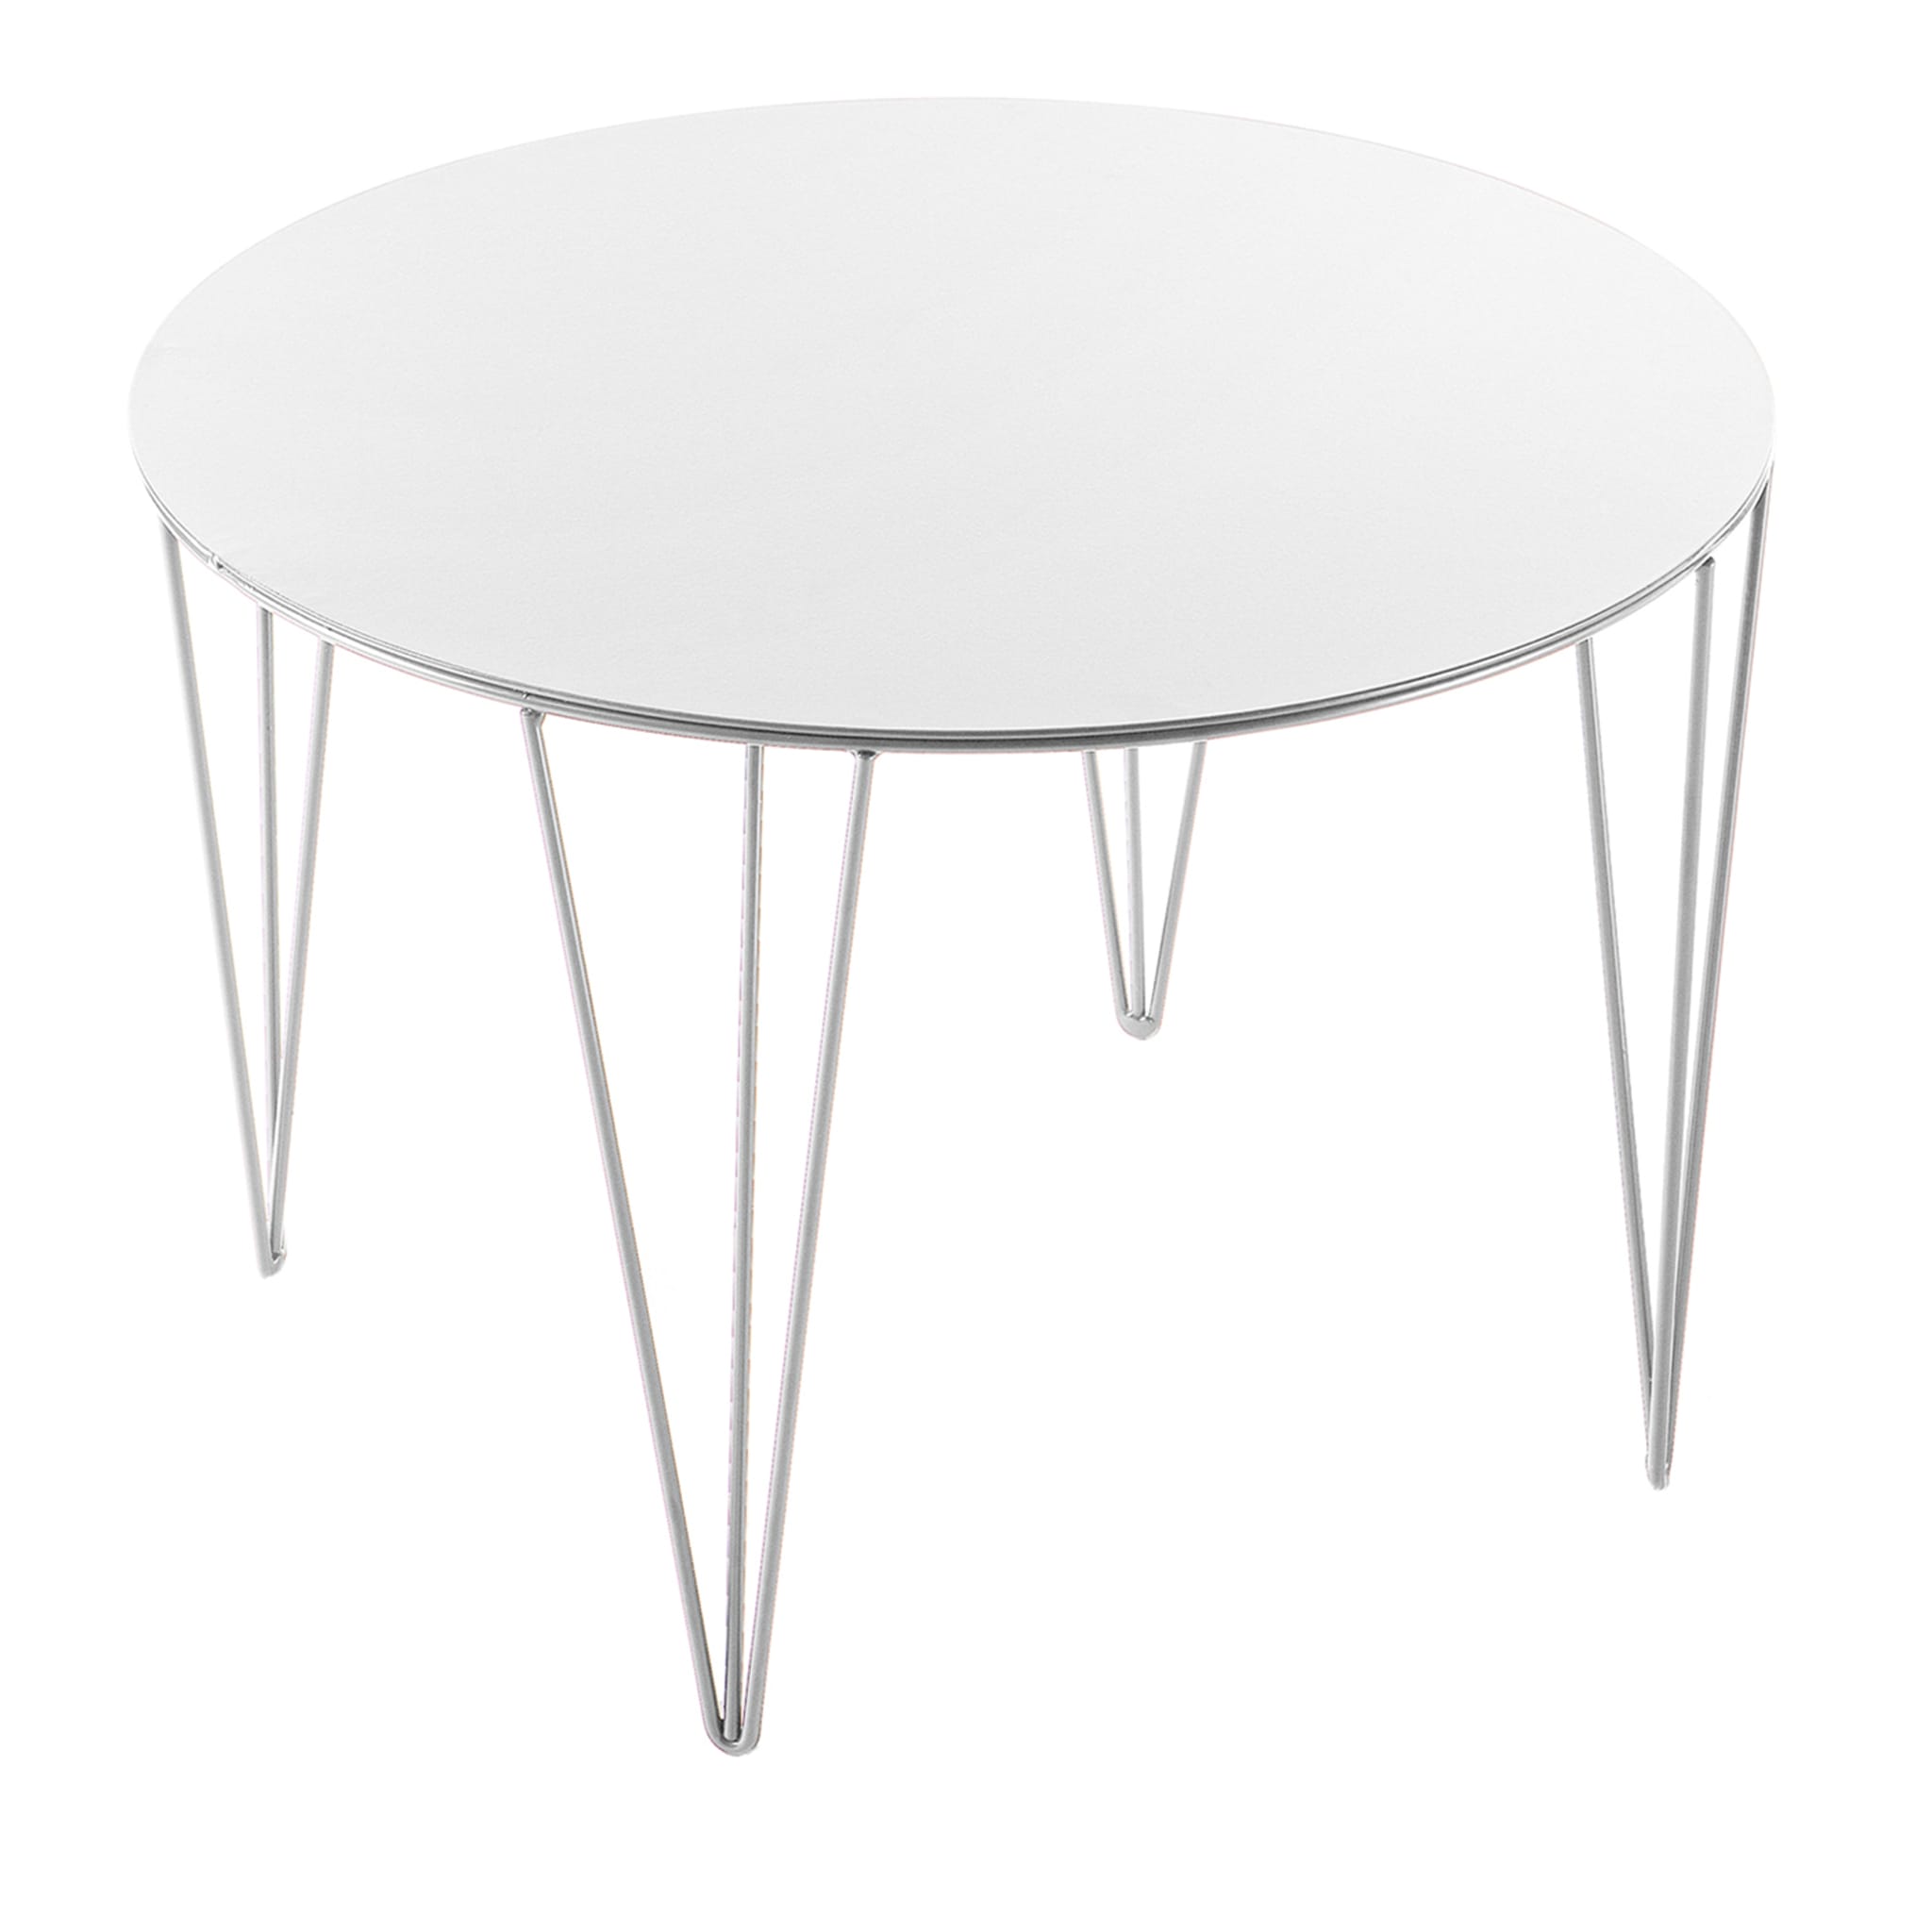 Chele White Round Coffee Table #1 - Main view